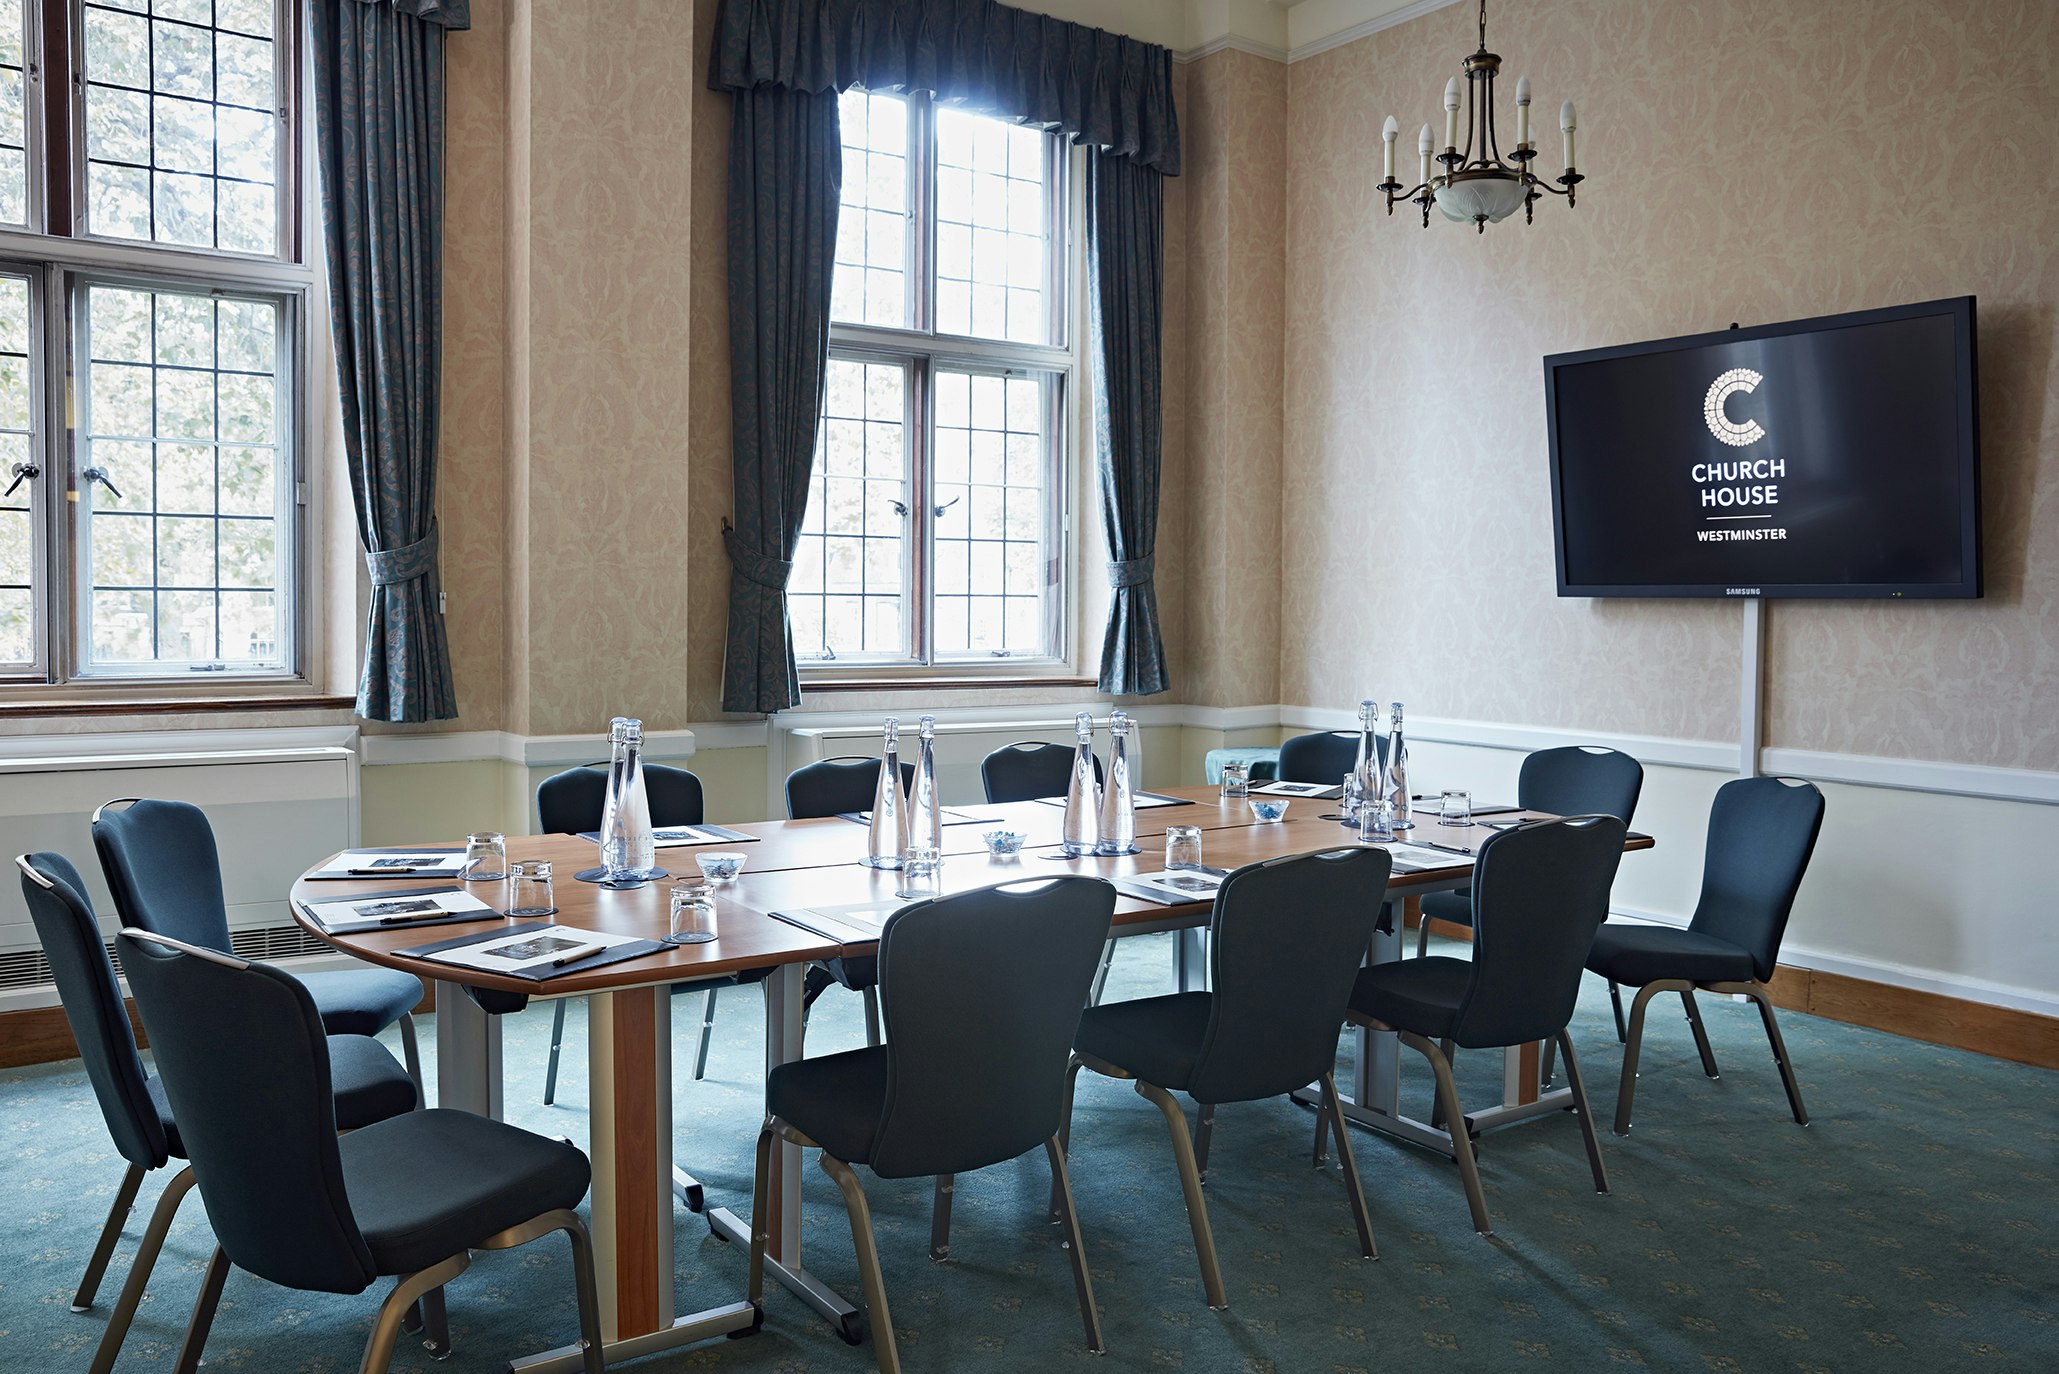 Church House Westminster - Charter Room image 1